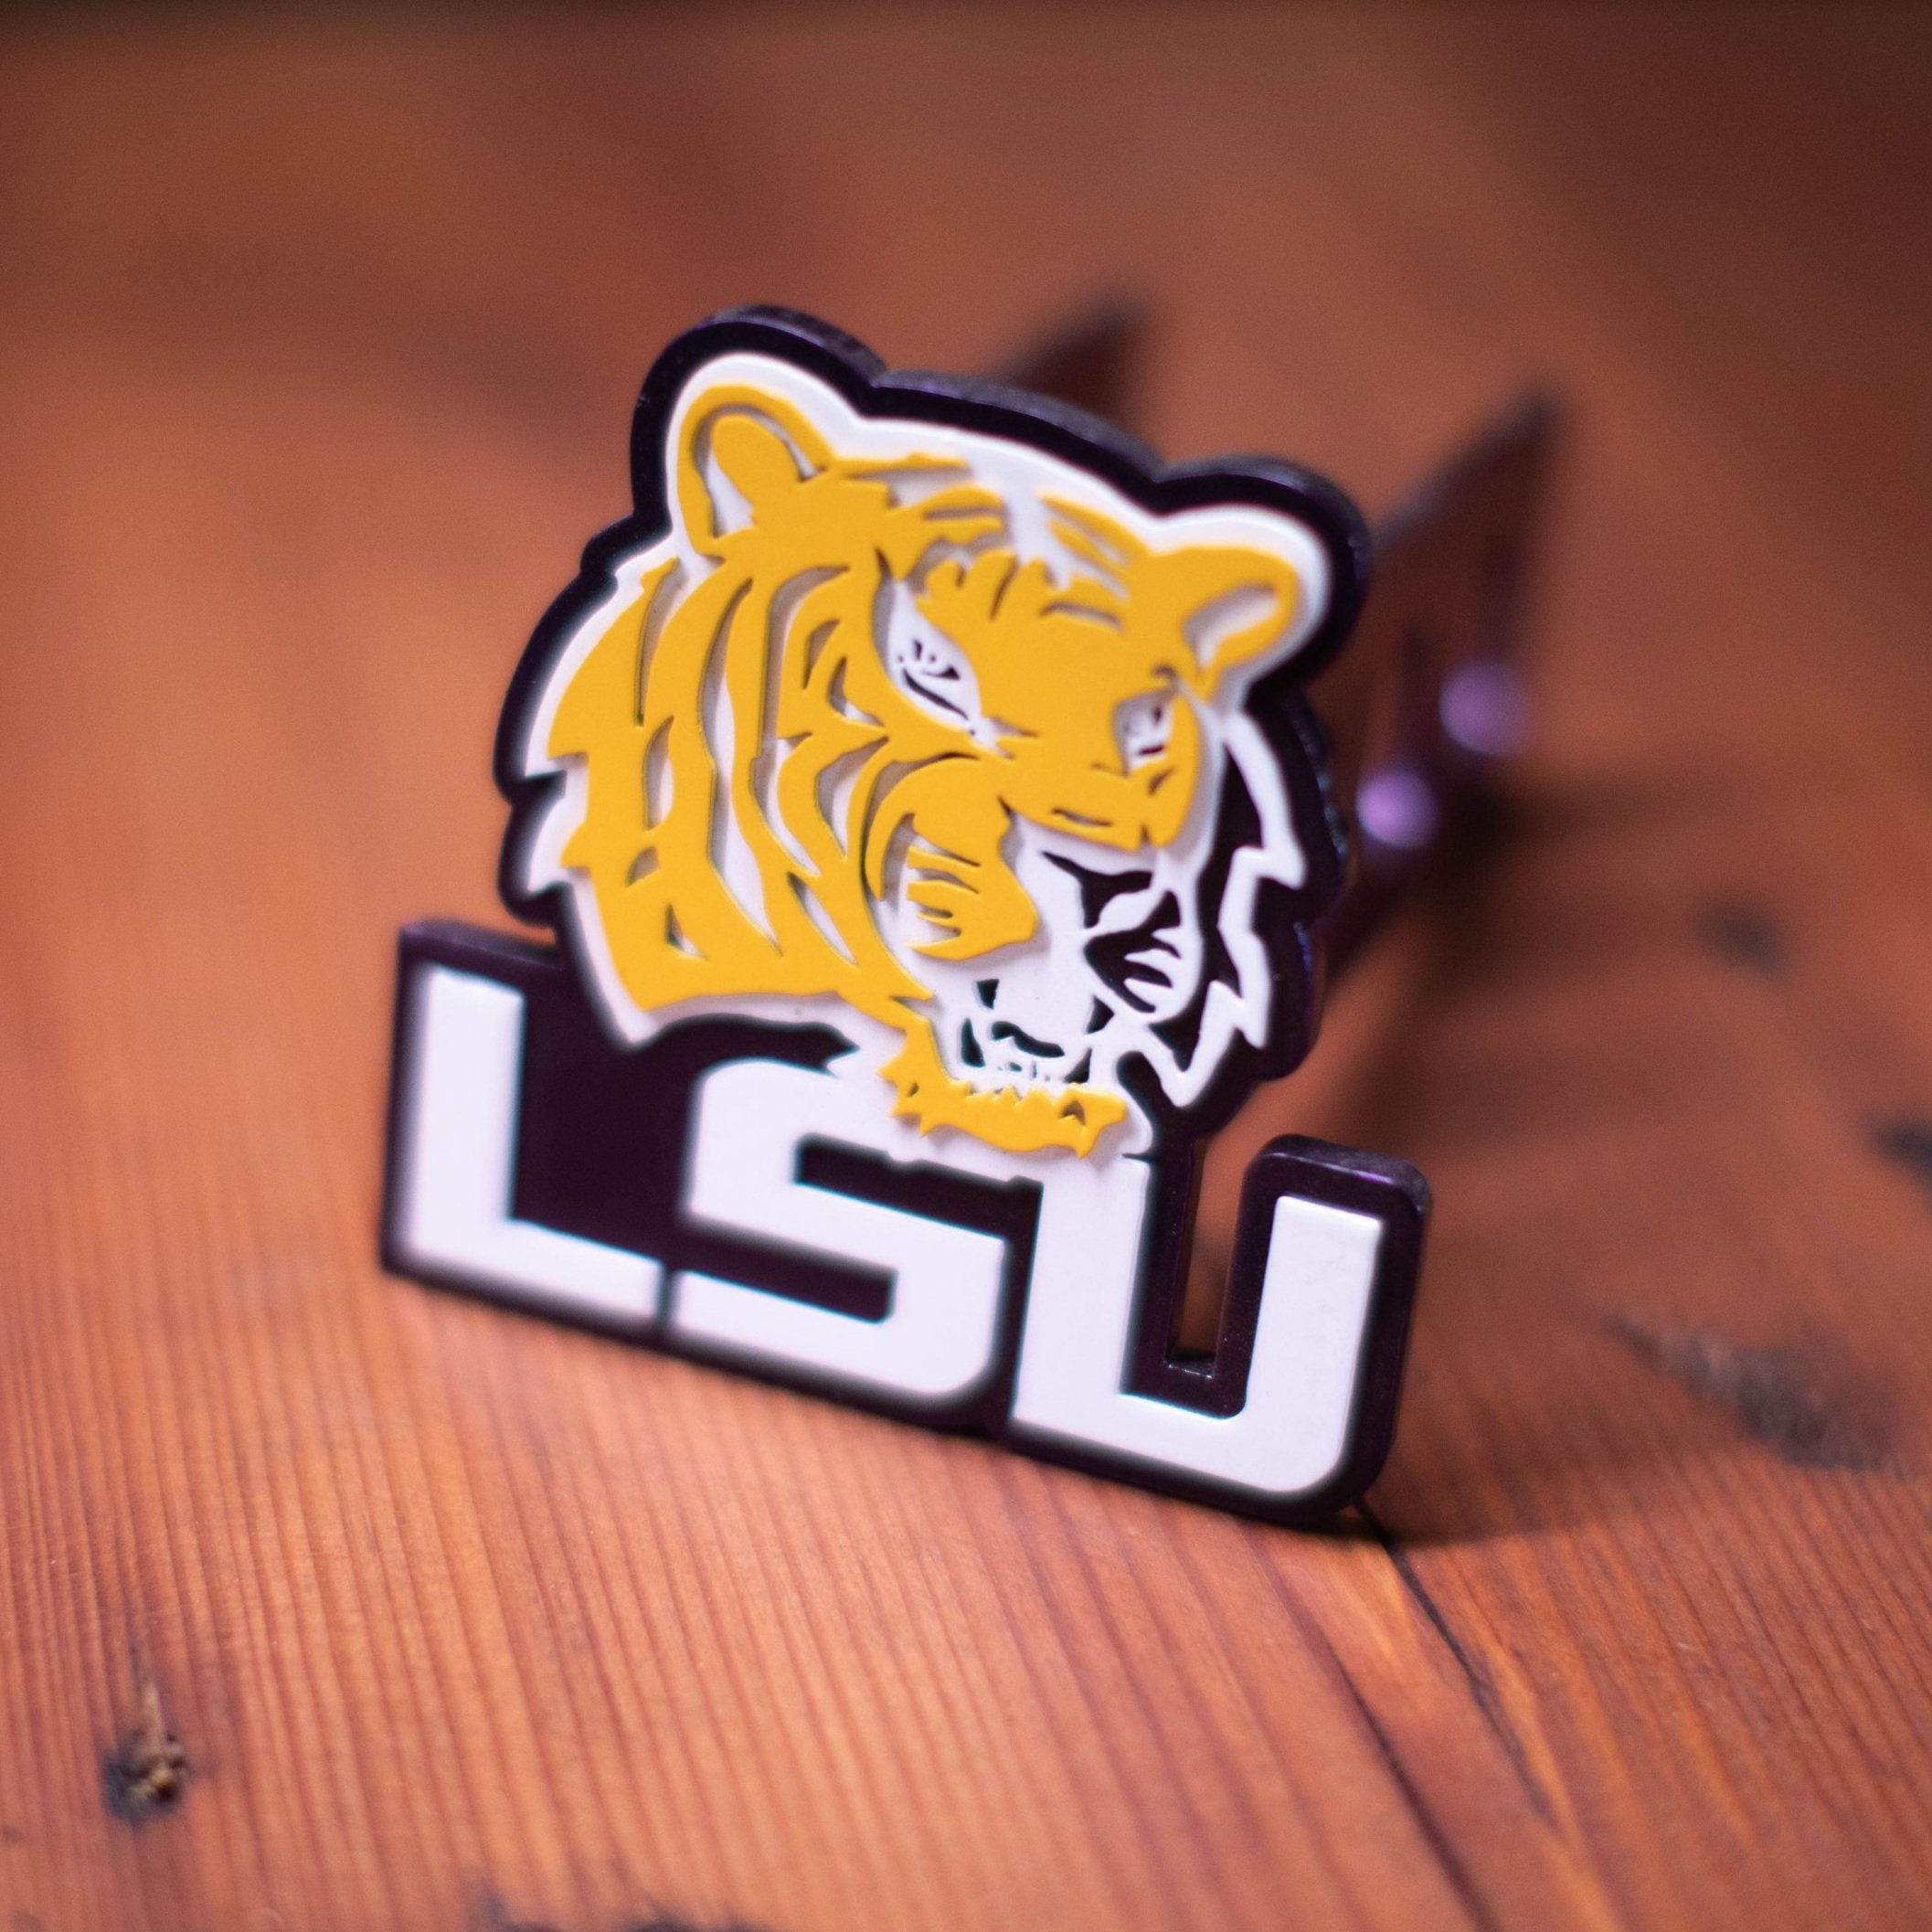 LSU Tigers Purple Metal Trailer Hitch Cover Fits 2 Inch Auto Car Truck Receiver with NCAA College Sports Logo 